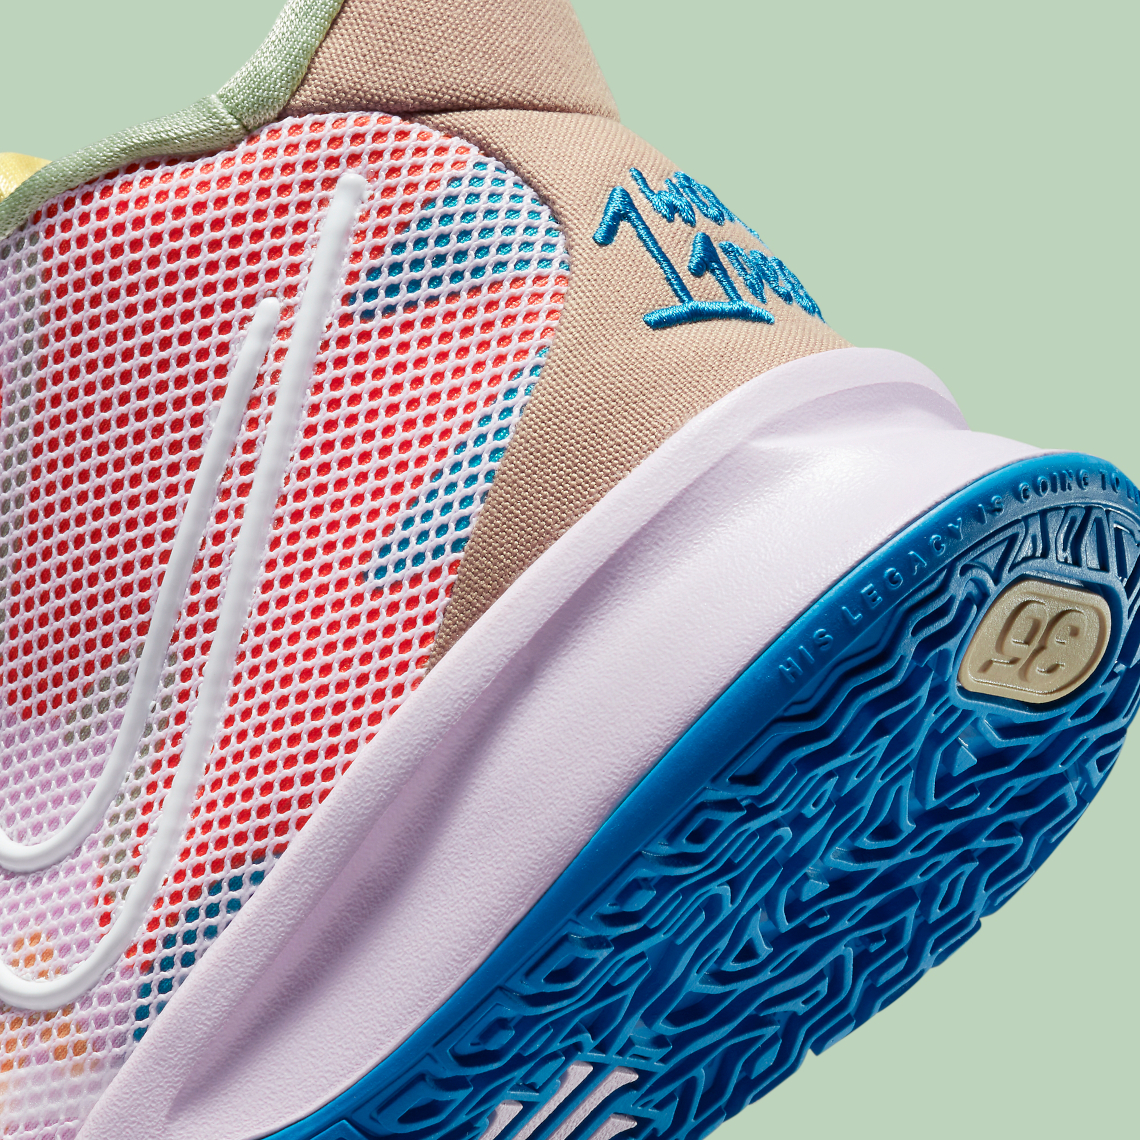 Nike Kyrie 7 1 World 1 People CQ9326-600 Release | SneakerNews.com